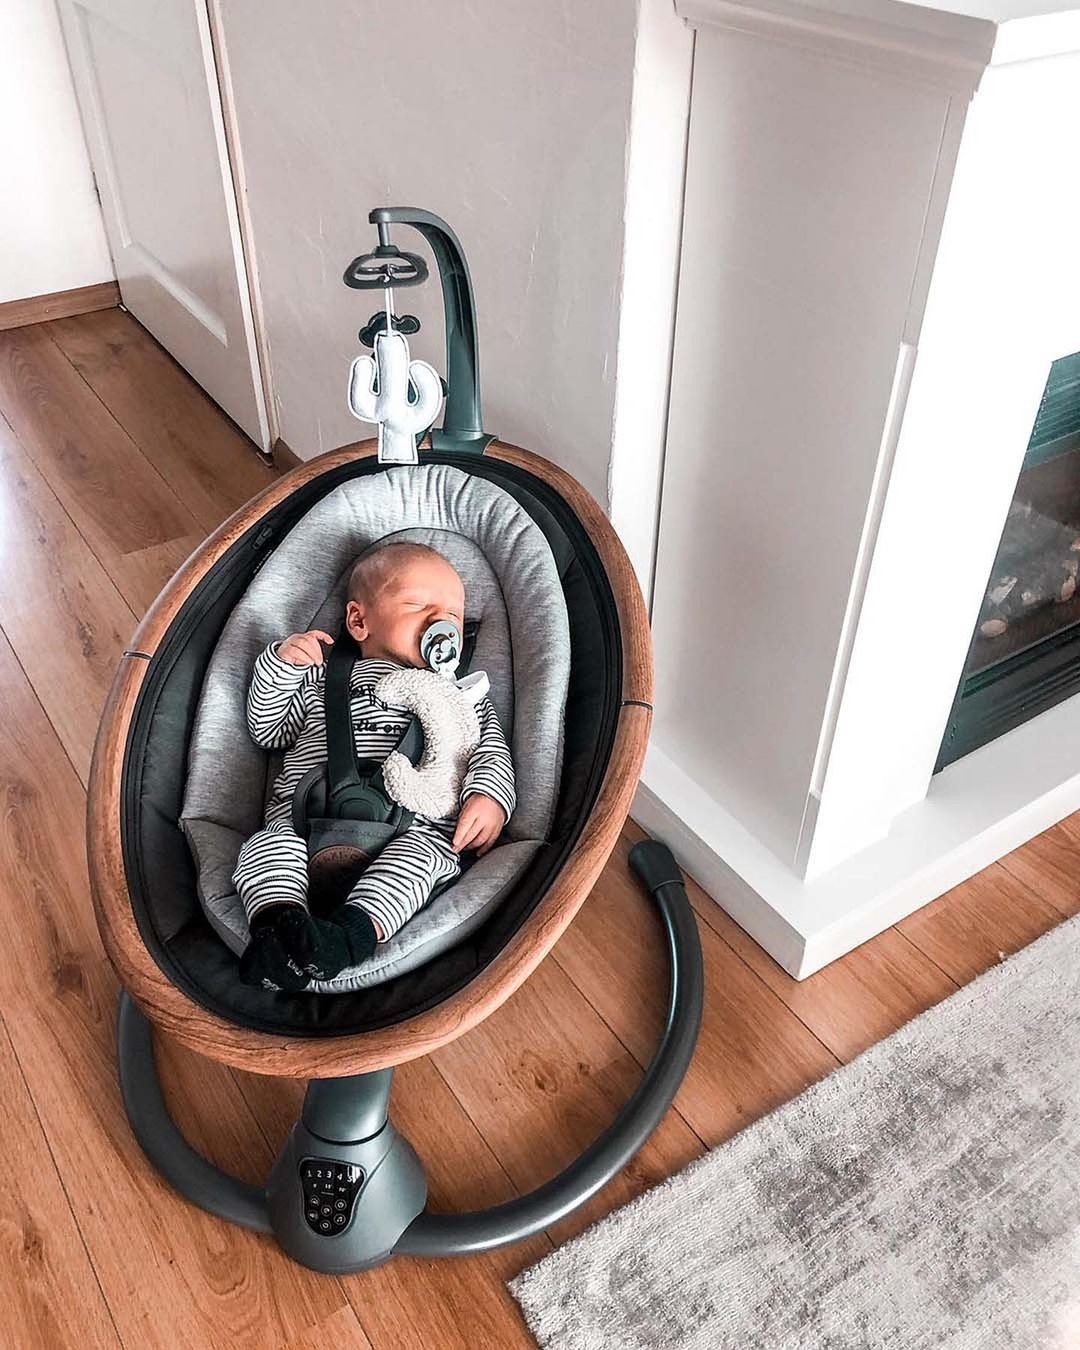 A baby inside the baby chair in a living room